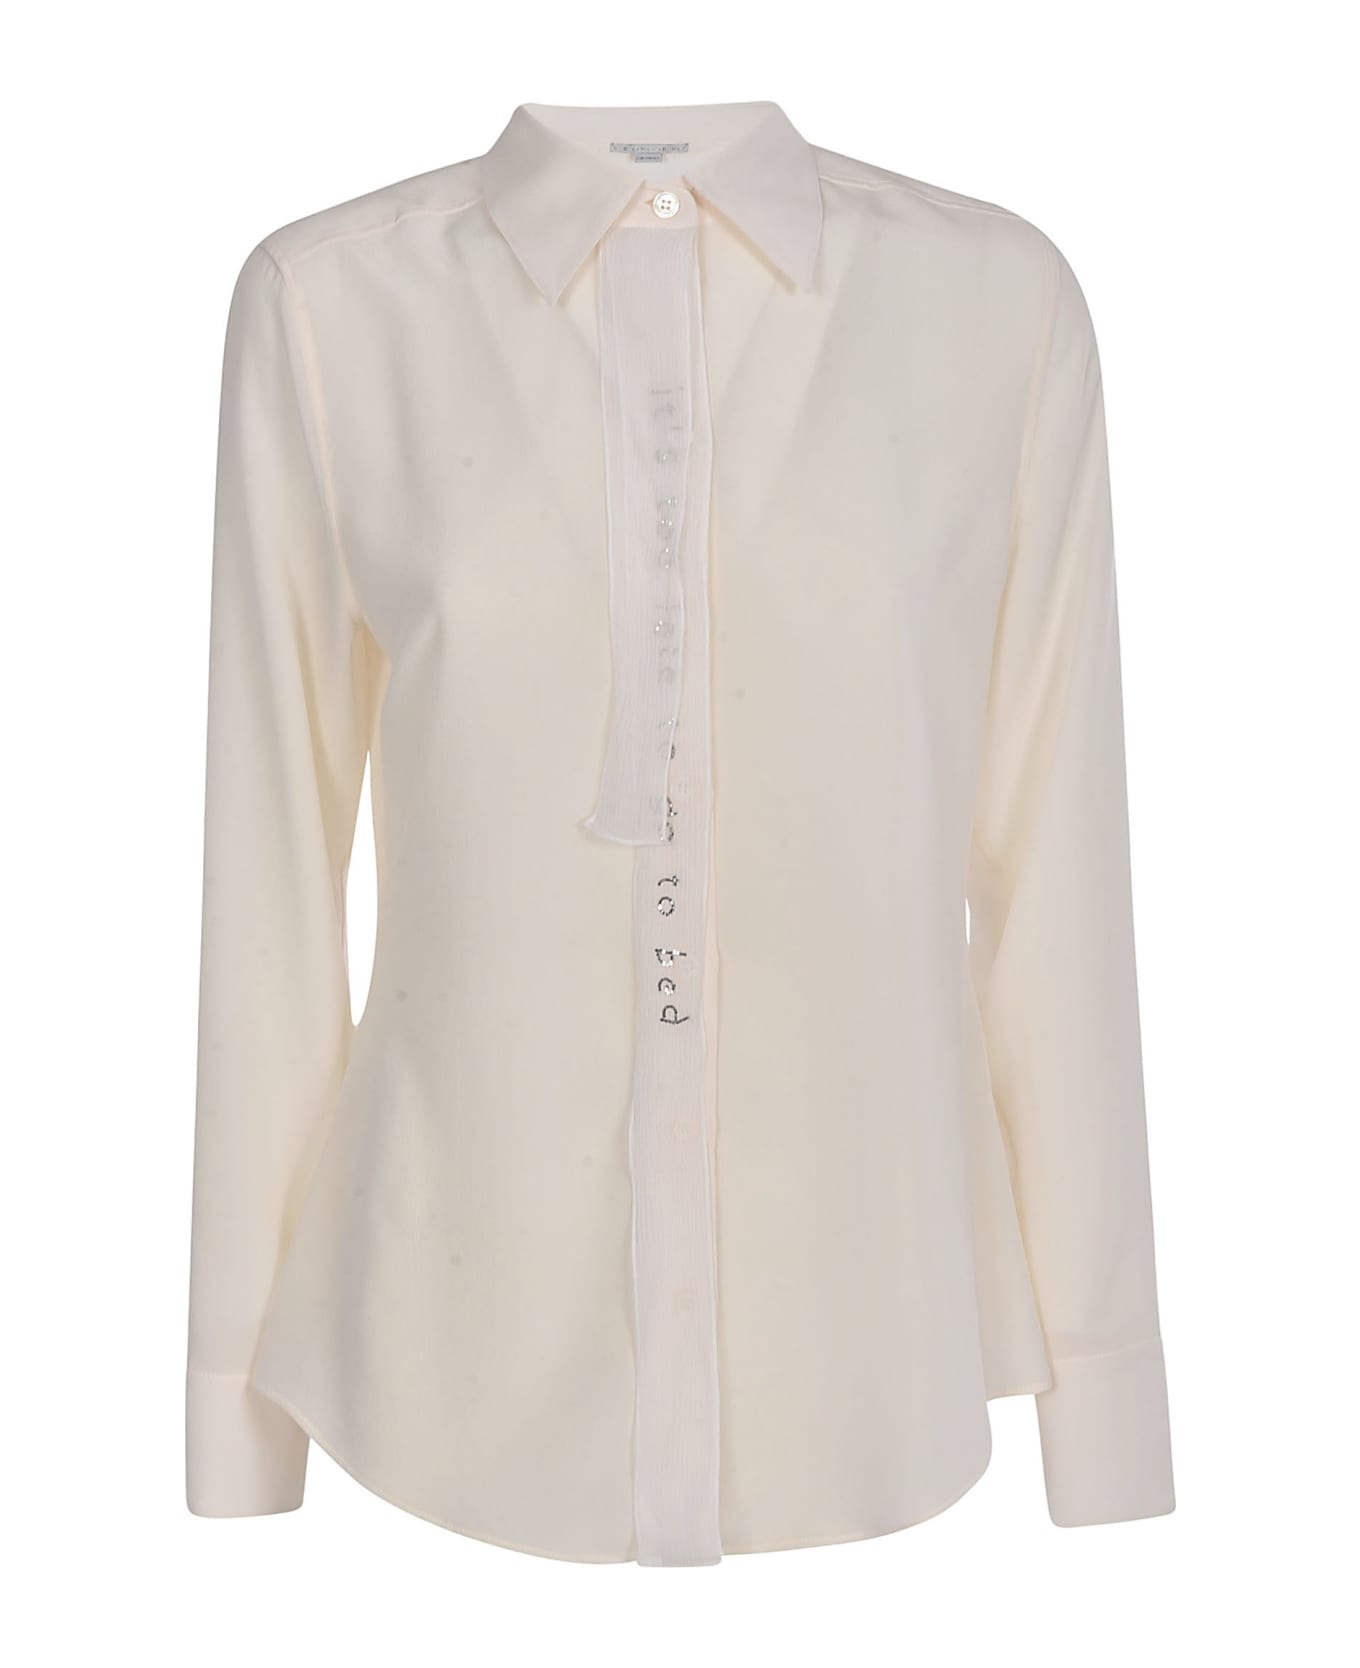 Stella McCartney It's Too Late To Go To Bed Shirt - Offwhite シャツ